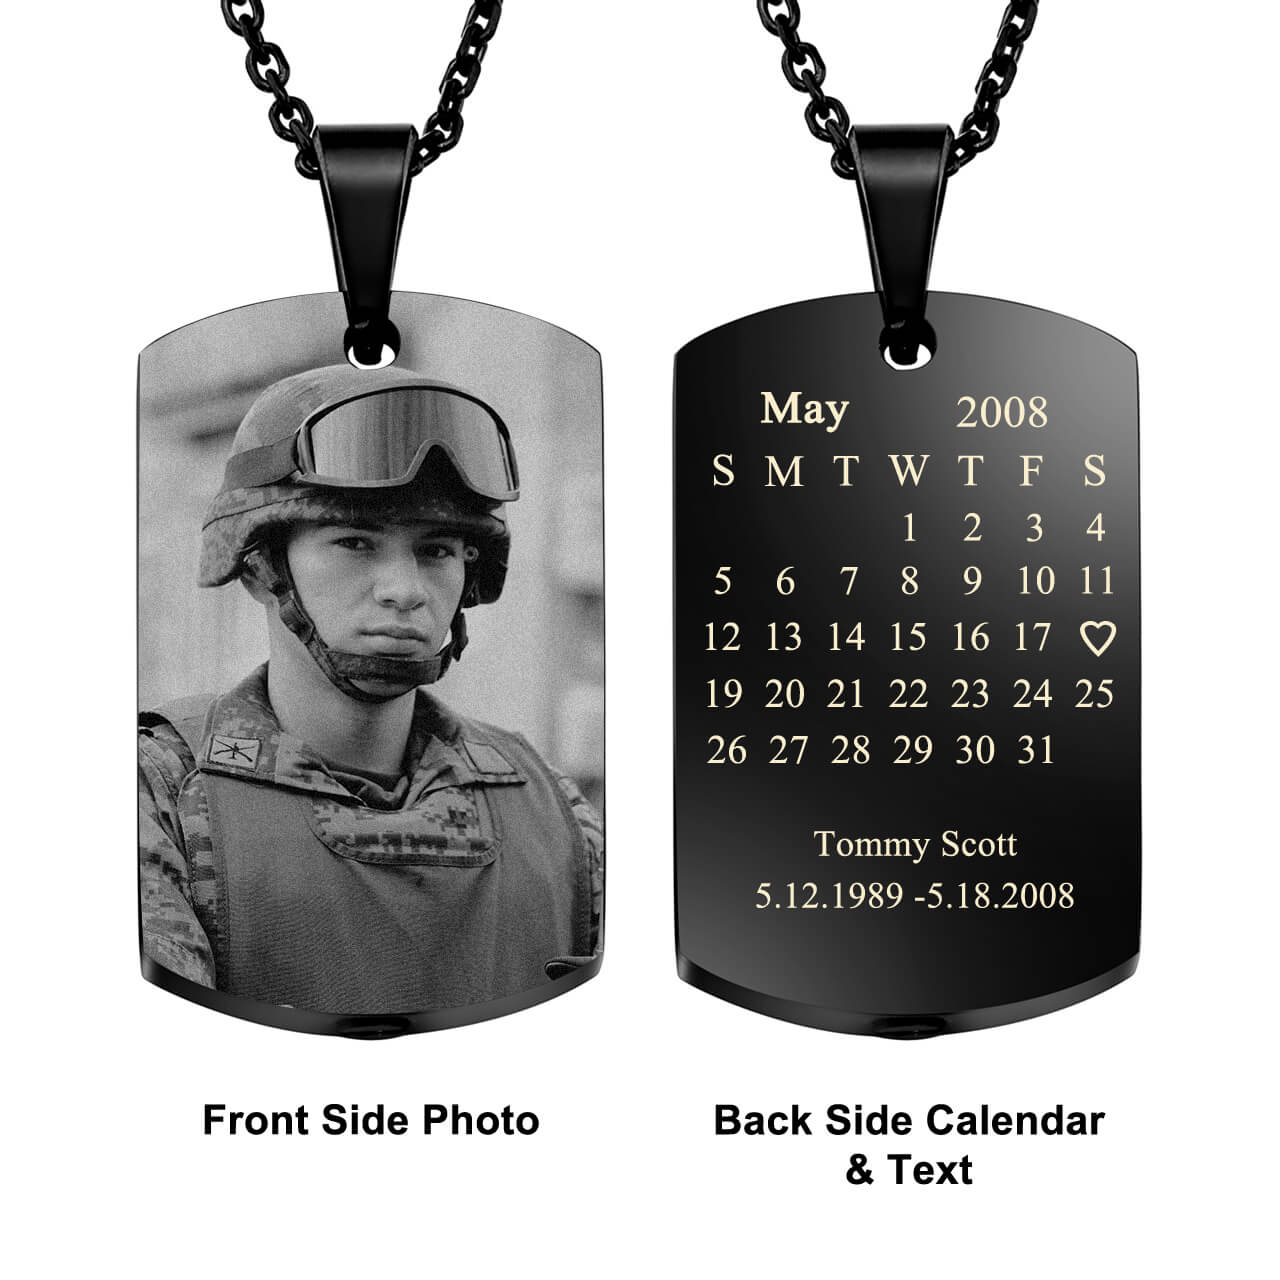 Dog Tag Cremation Pendant, Military Jewelry For Men